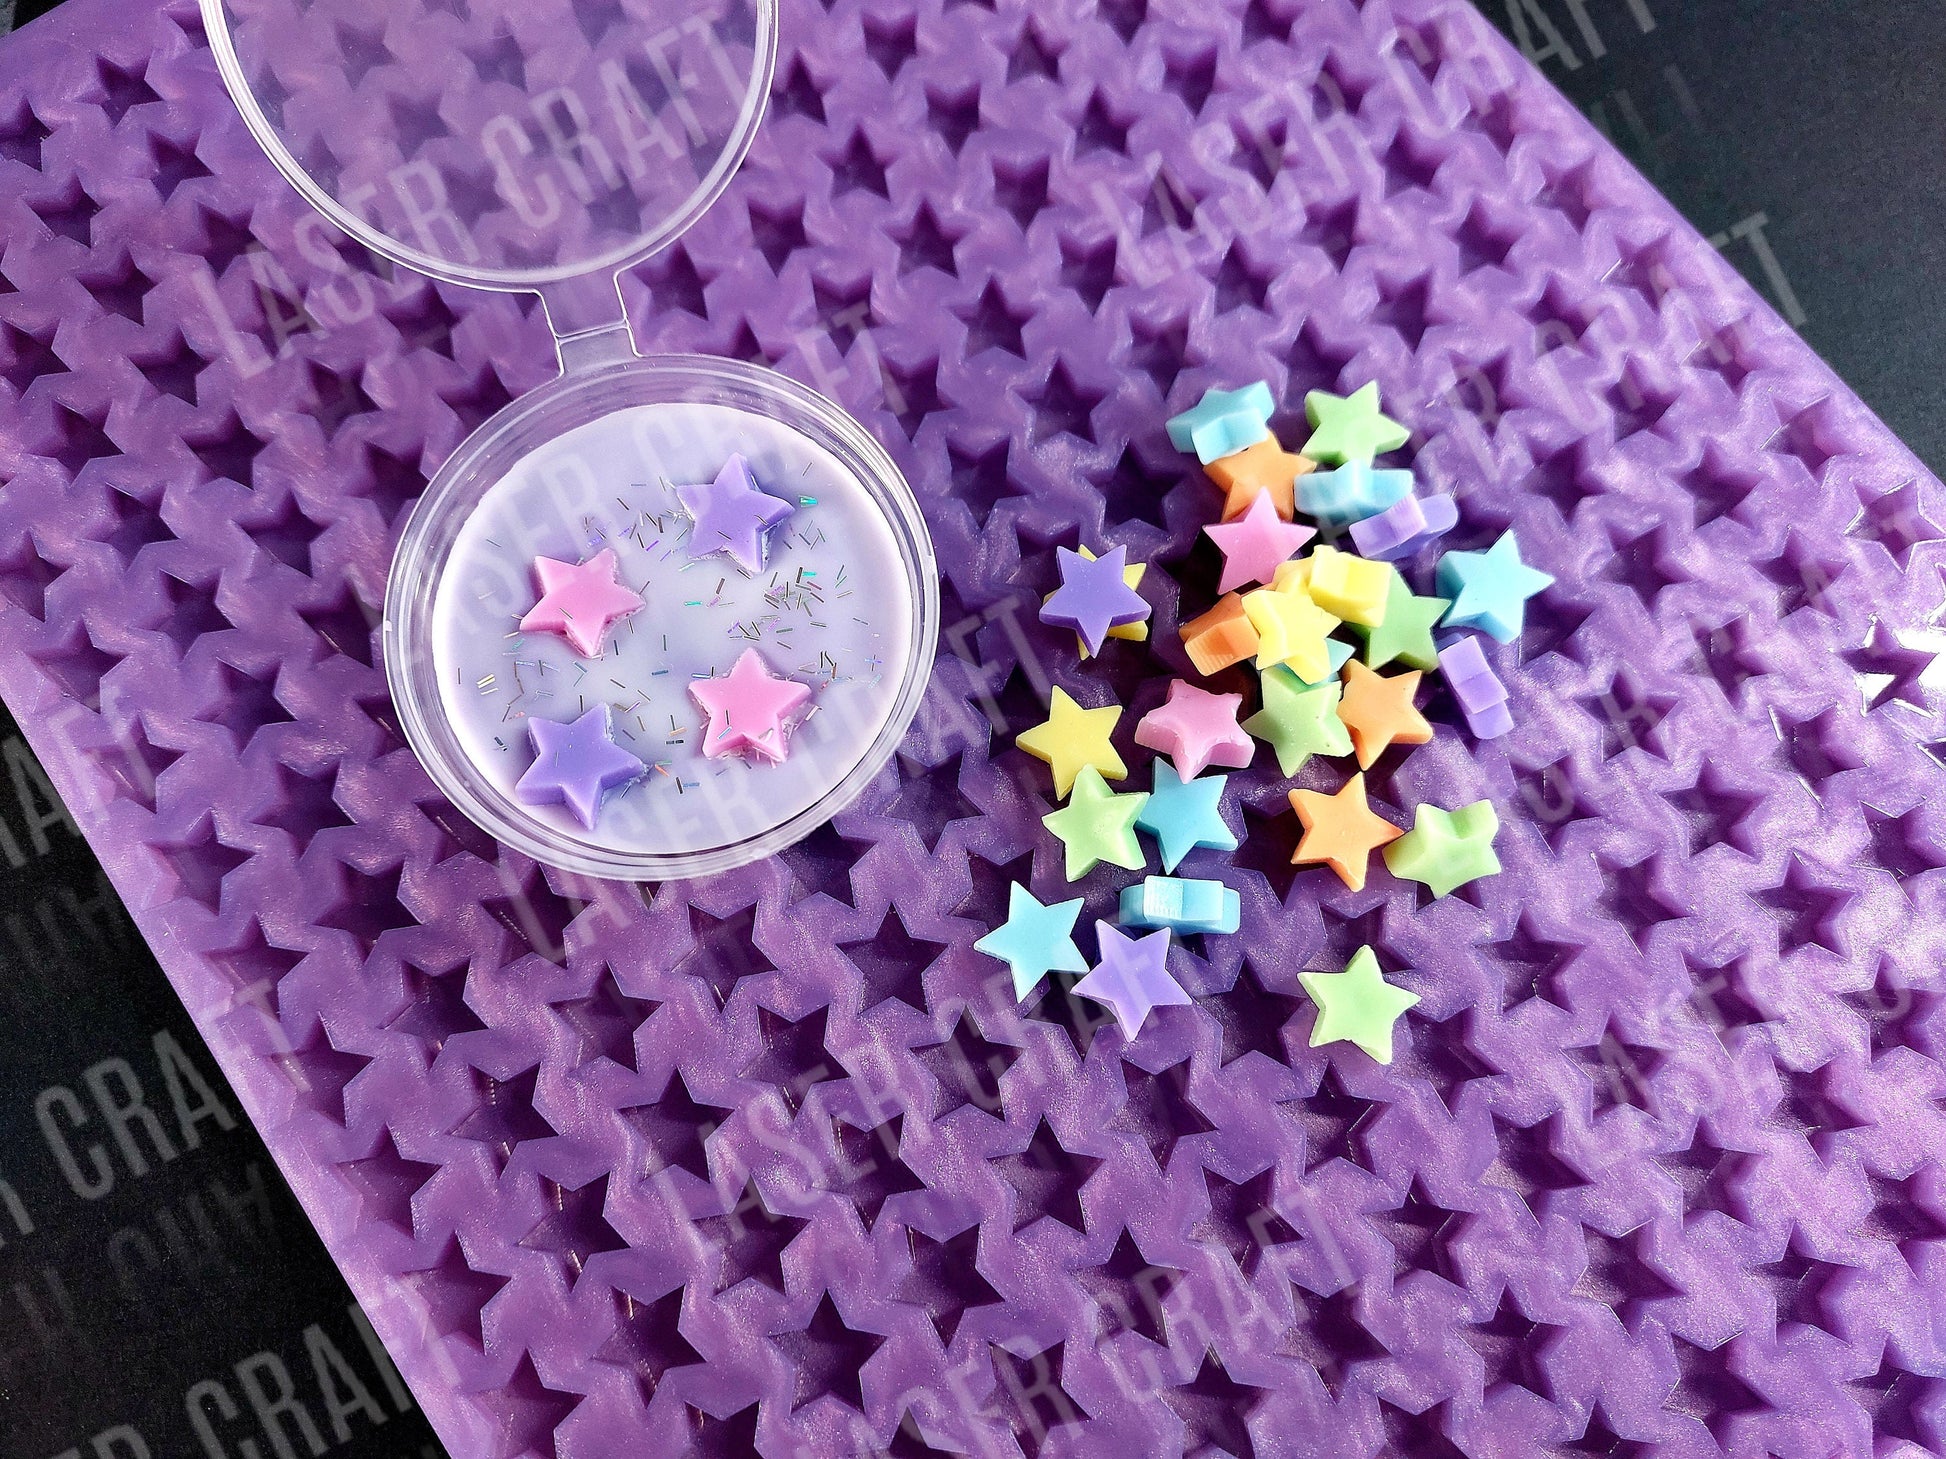 Snowflake Scoopable Silicone Mould for wax, resin, soap etc